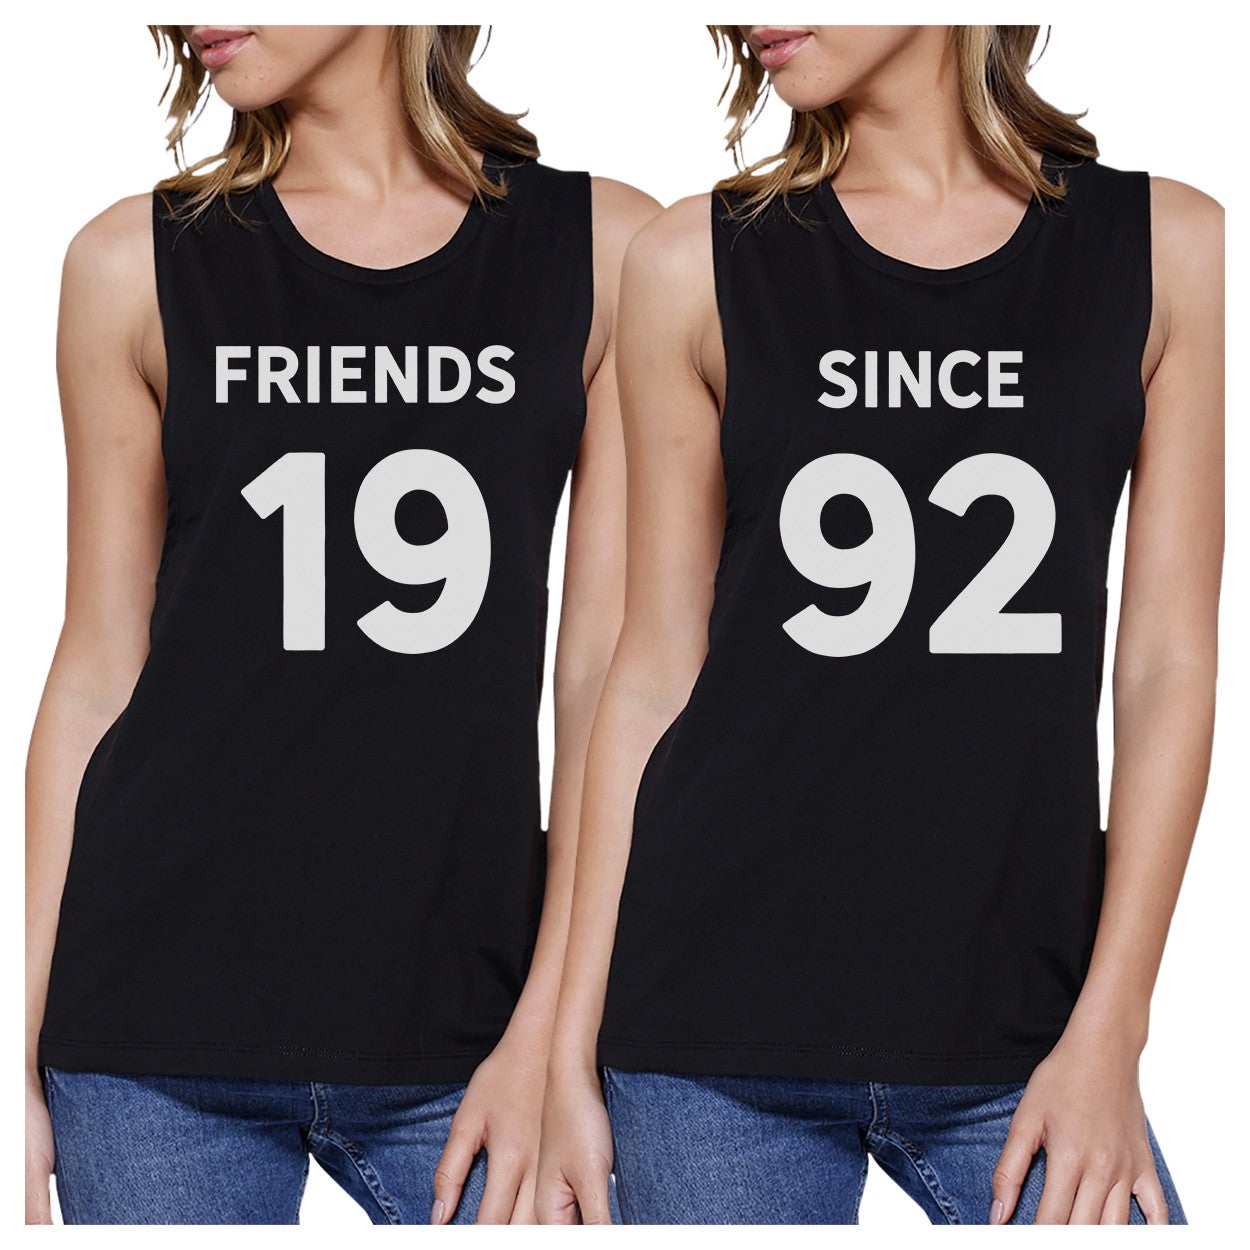 Friends Since Custom Years BFF Matching Black Muscle Tops